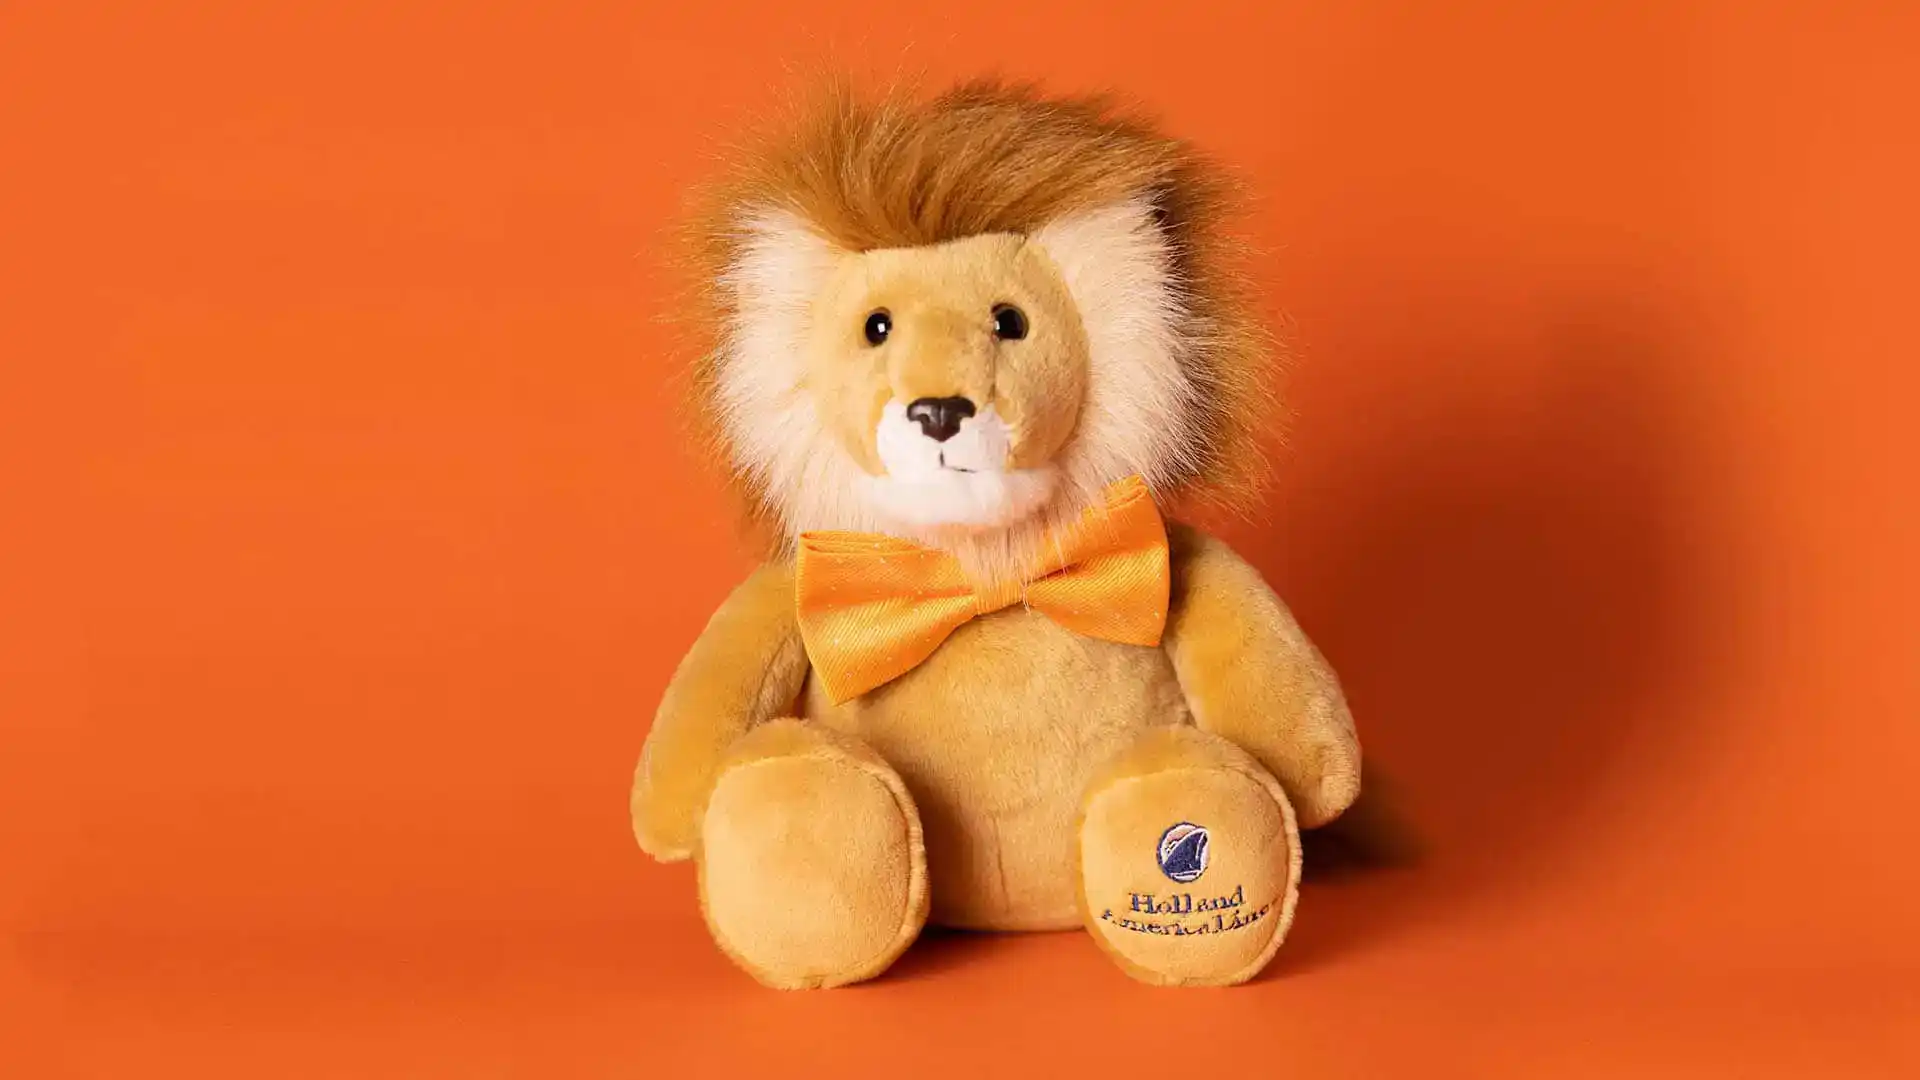 View of Holland America Line's Lewie the Lion mascot plush in front of orange background.